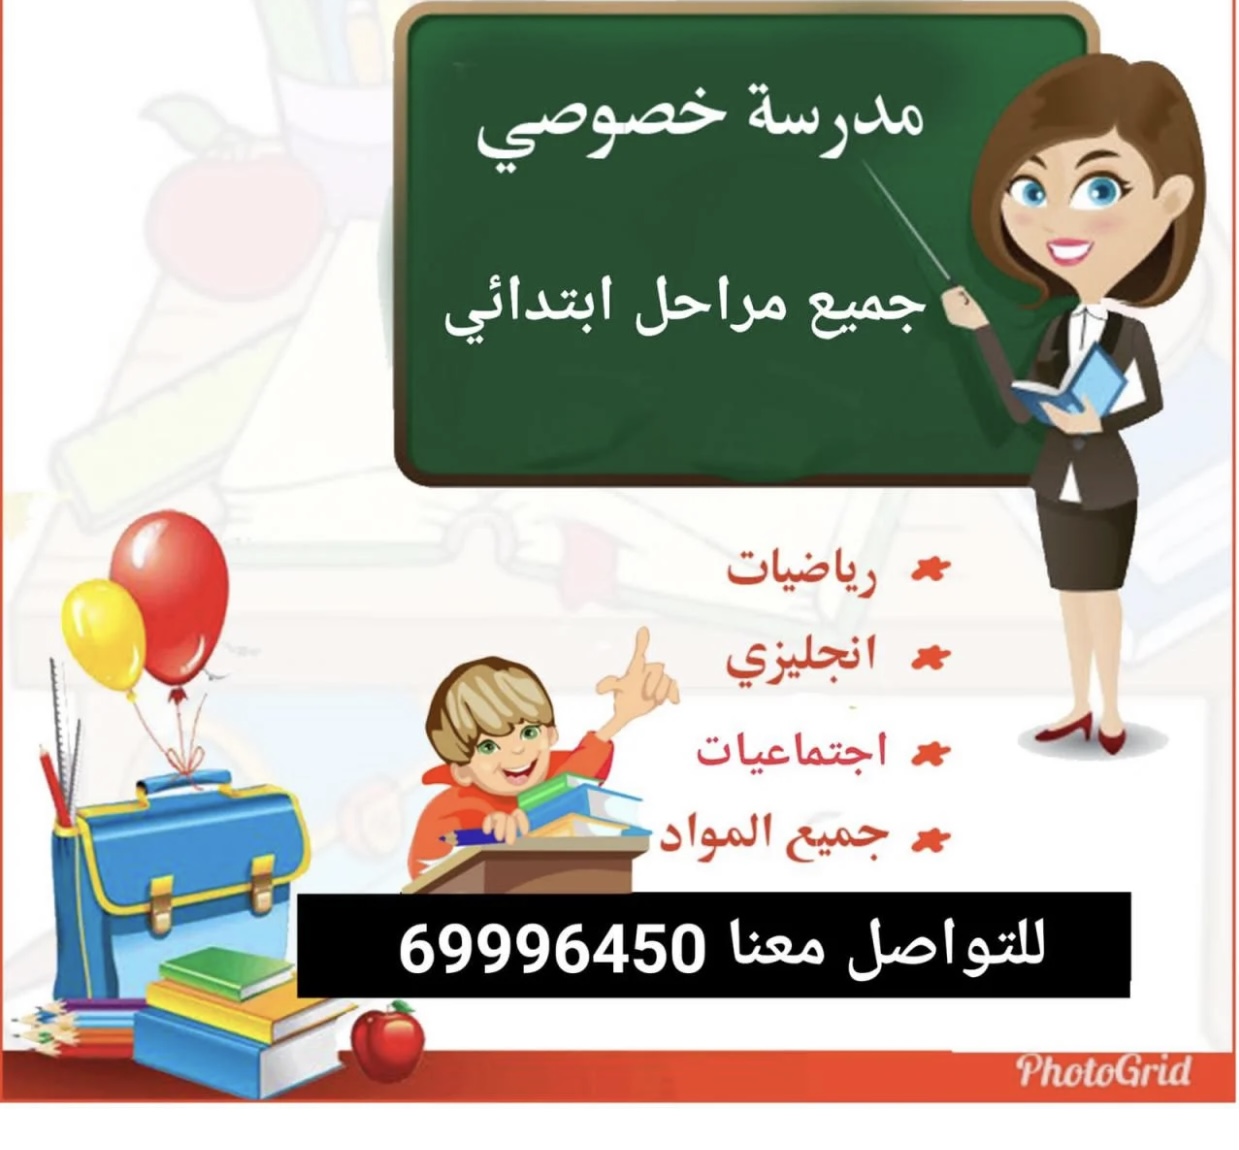 You are currently viewing مدرسة انكليزي رقم مدرسة انجليزي 69996450 مدرسة لغة انجليزية مدرسة تأسيس انجليزي الكويت